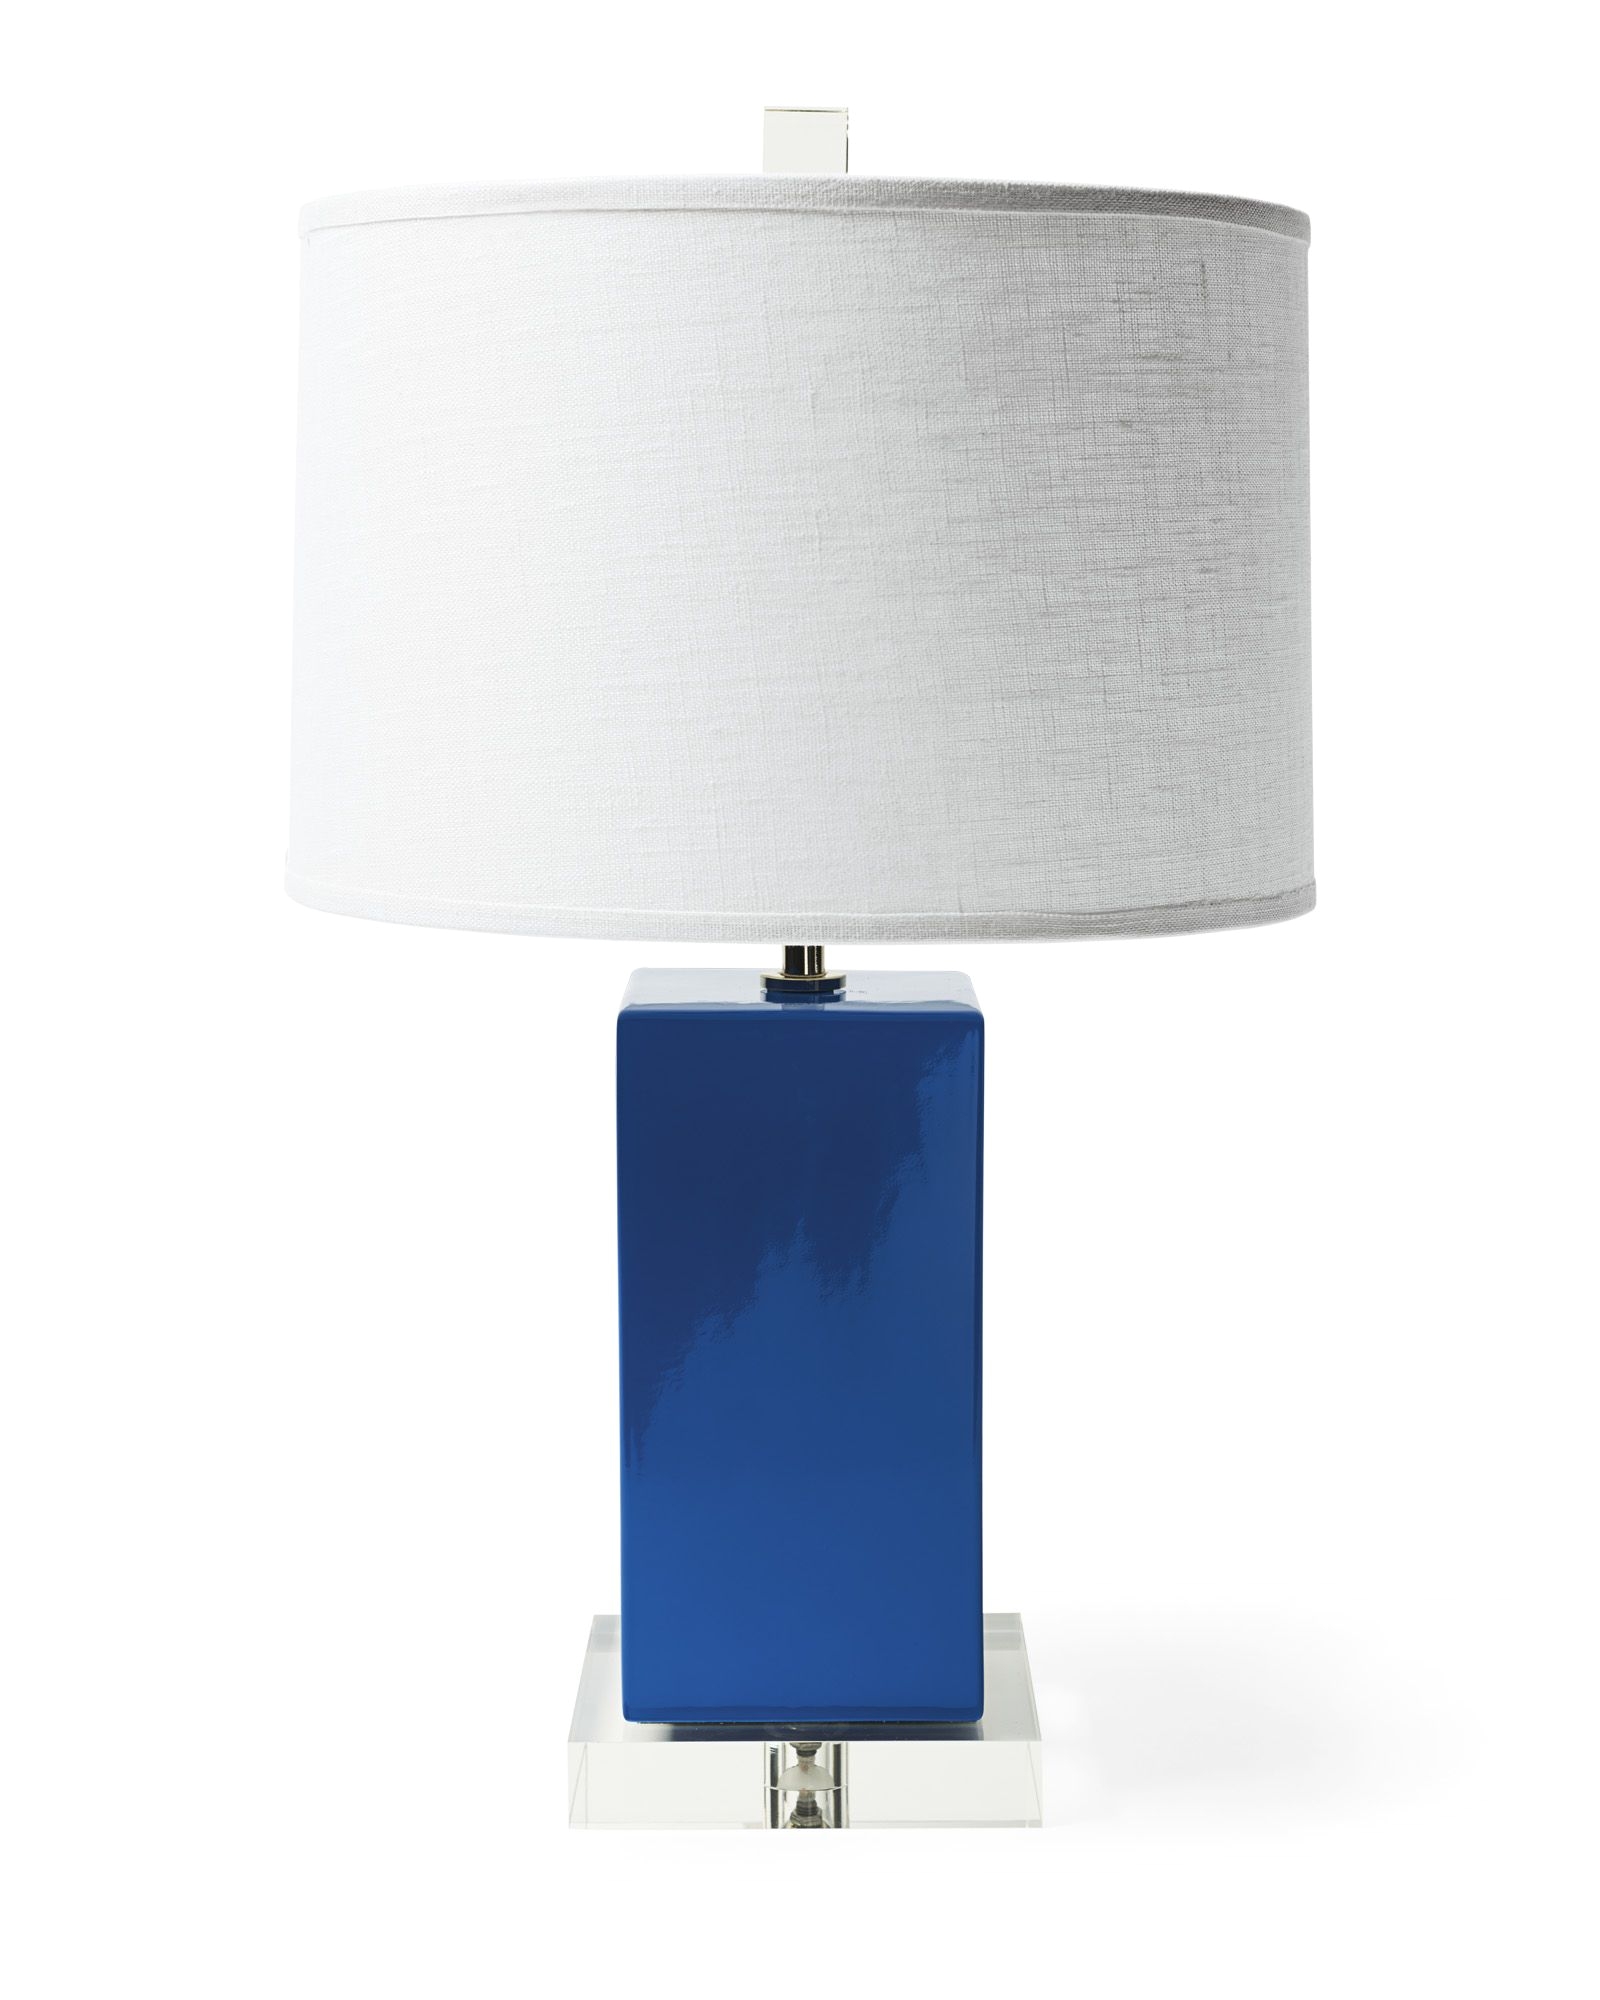 shop the darby table lamp and browse the rest of our lighting at serena and lily we specialize in unique designer and coastal styles